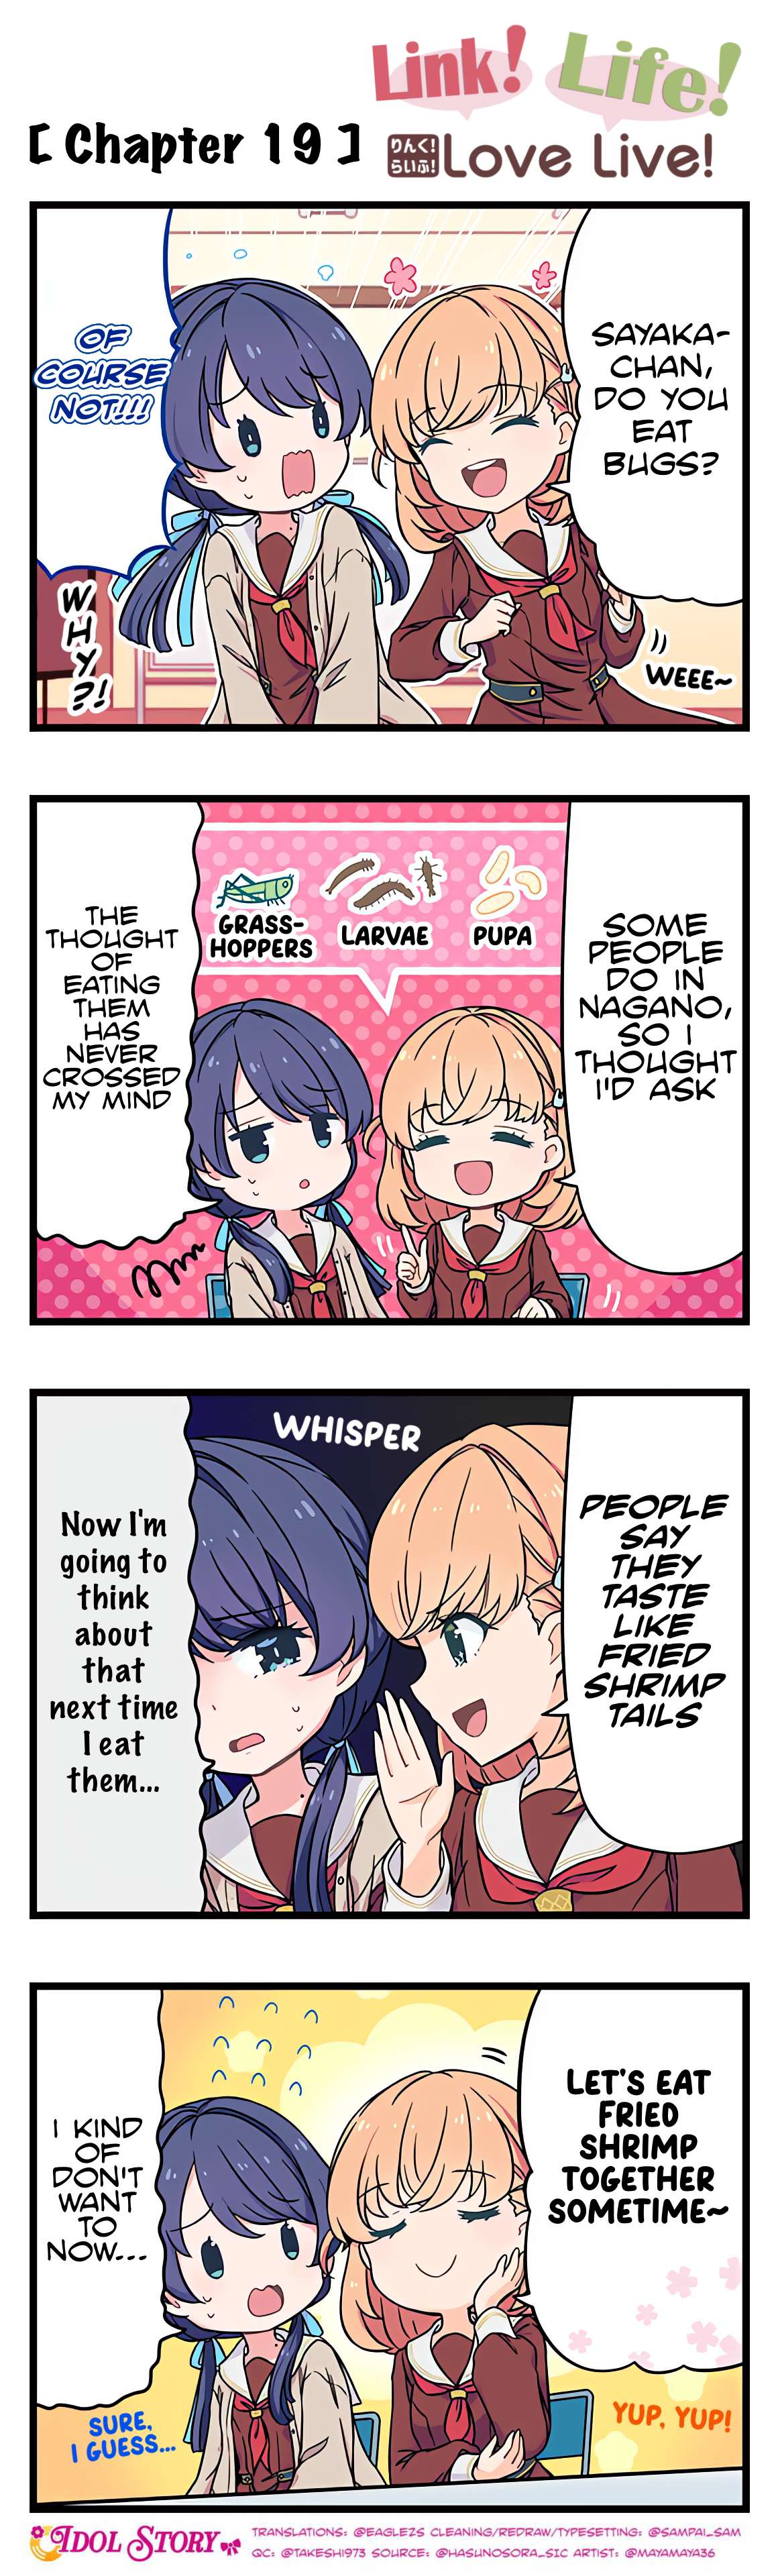 Link! Life! Love Live! - chapter 19 - #1